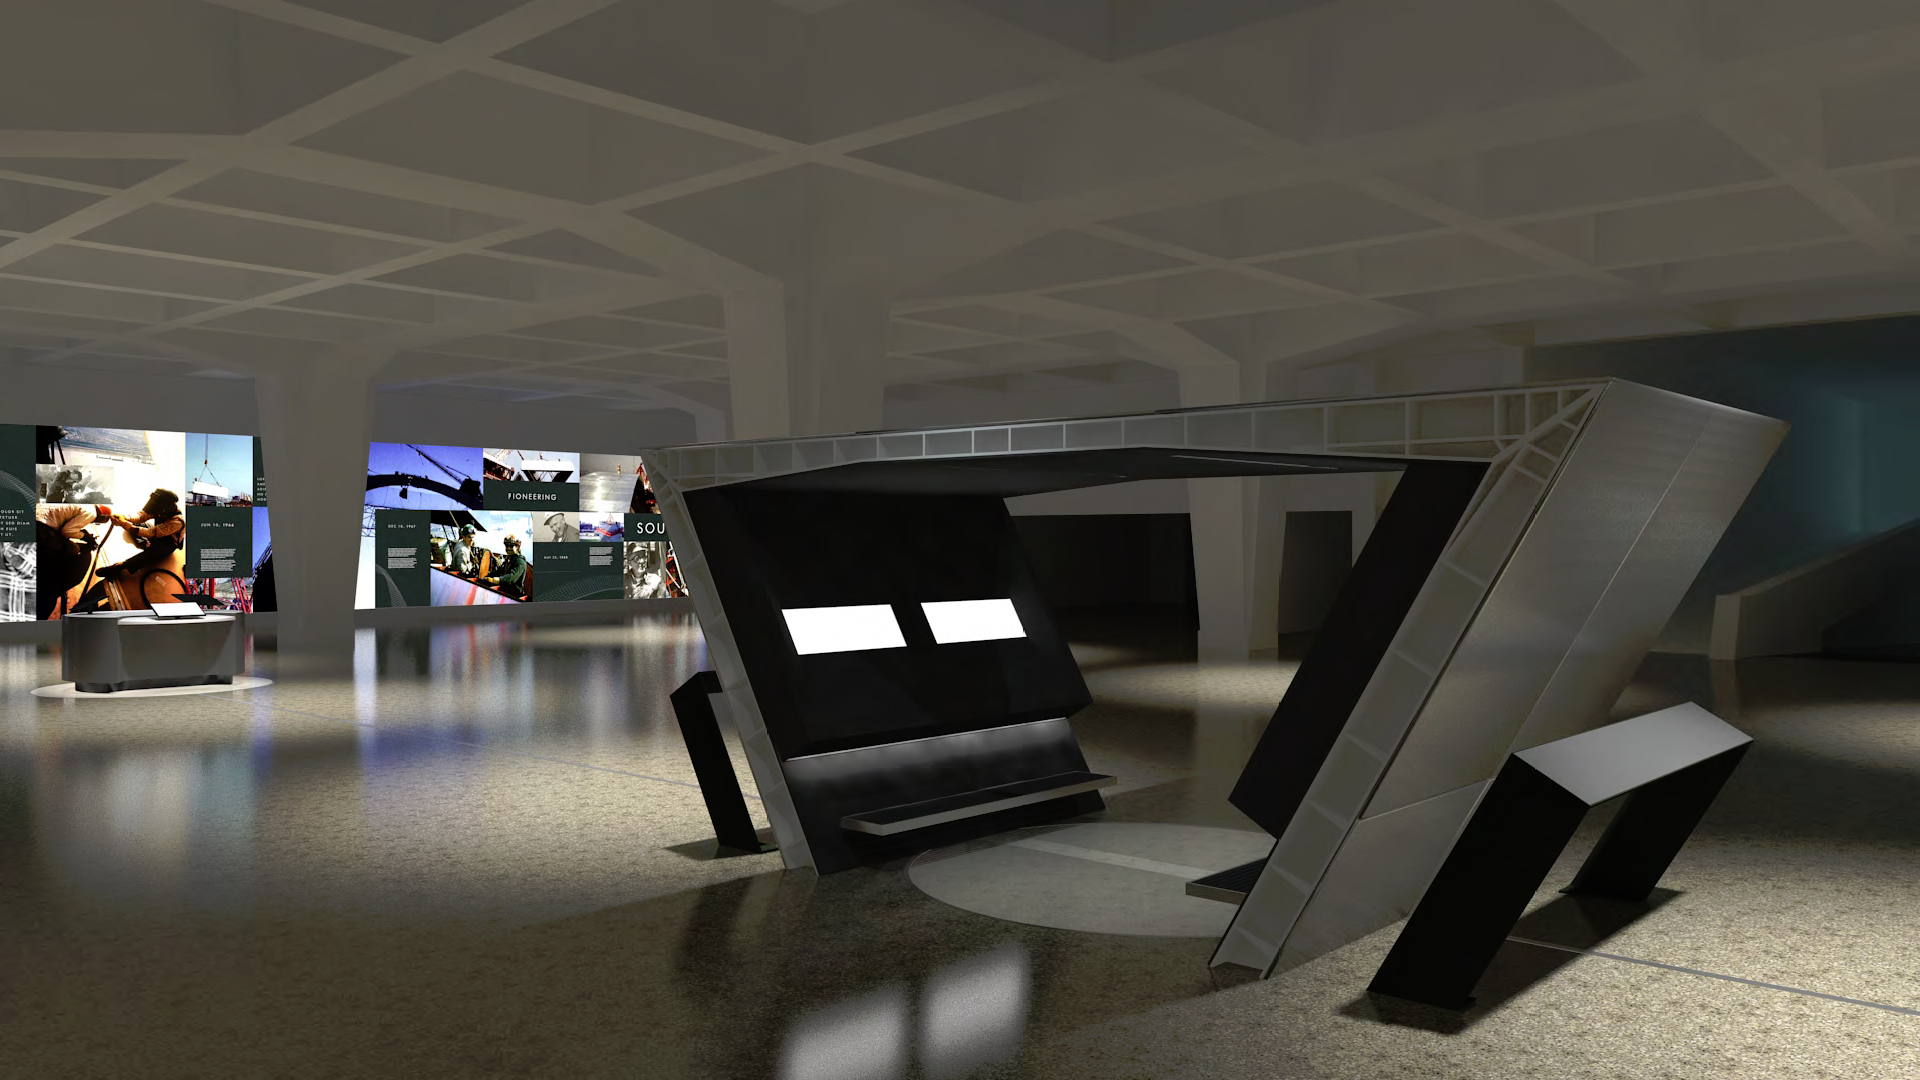 Renovated Gateway Arch will connect to downtown St. Louis, feature interactive displays | St ...